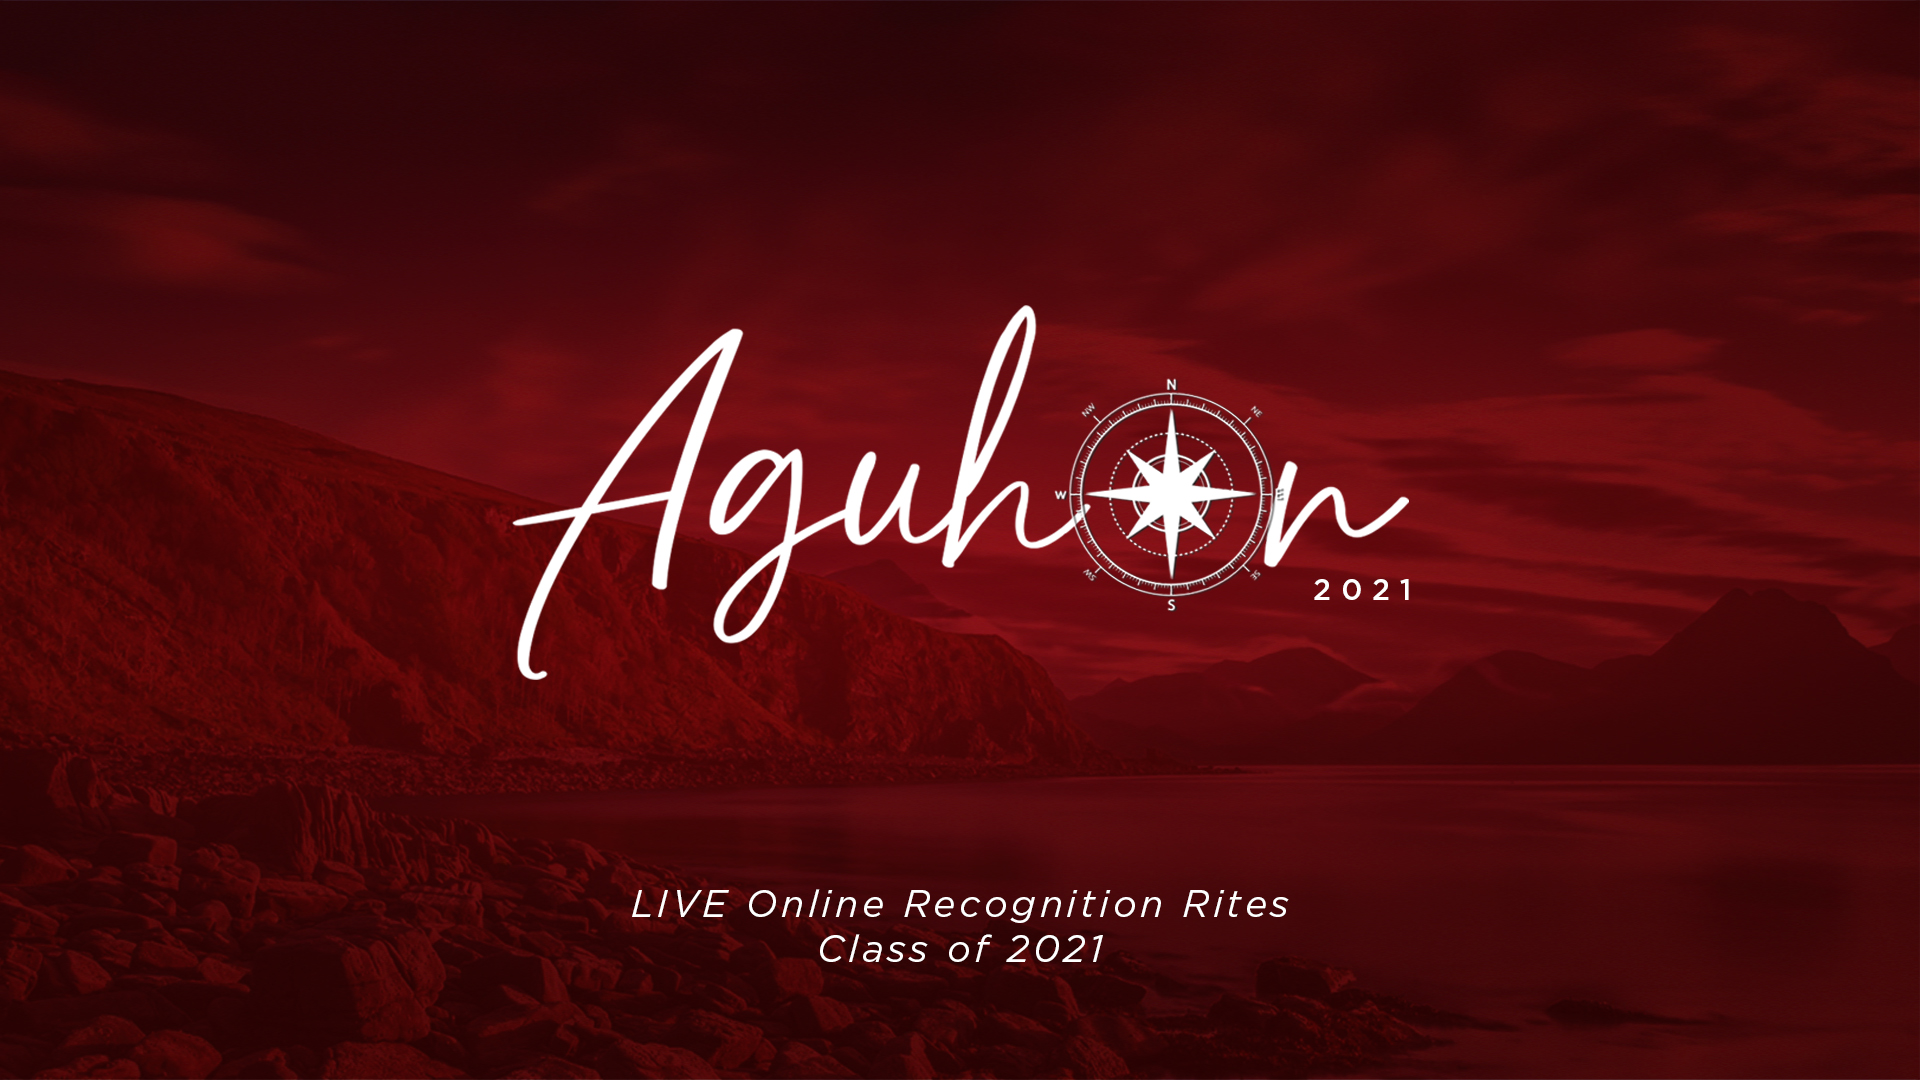 Aguhon: Recognition Rites of the UP College of Law Class of 2021